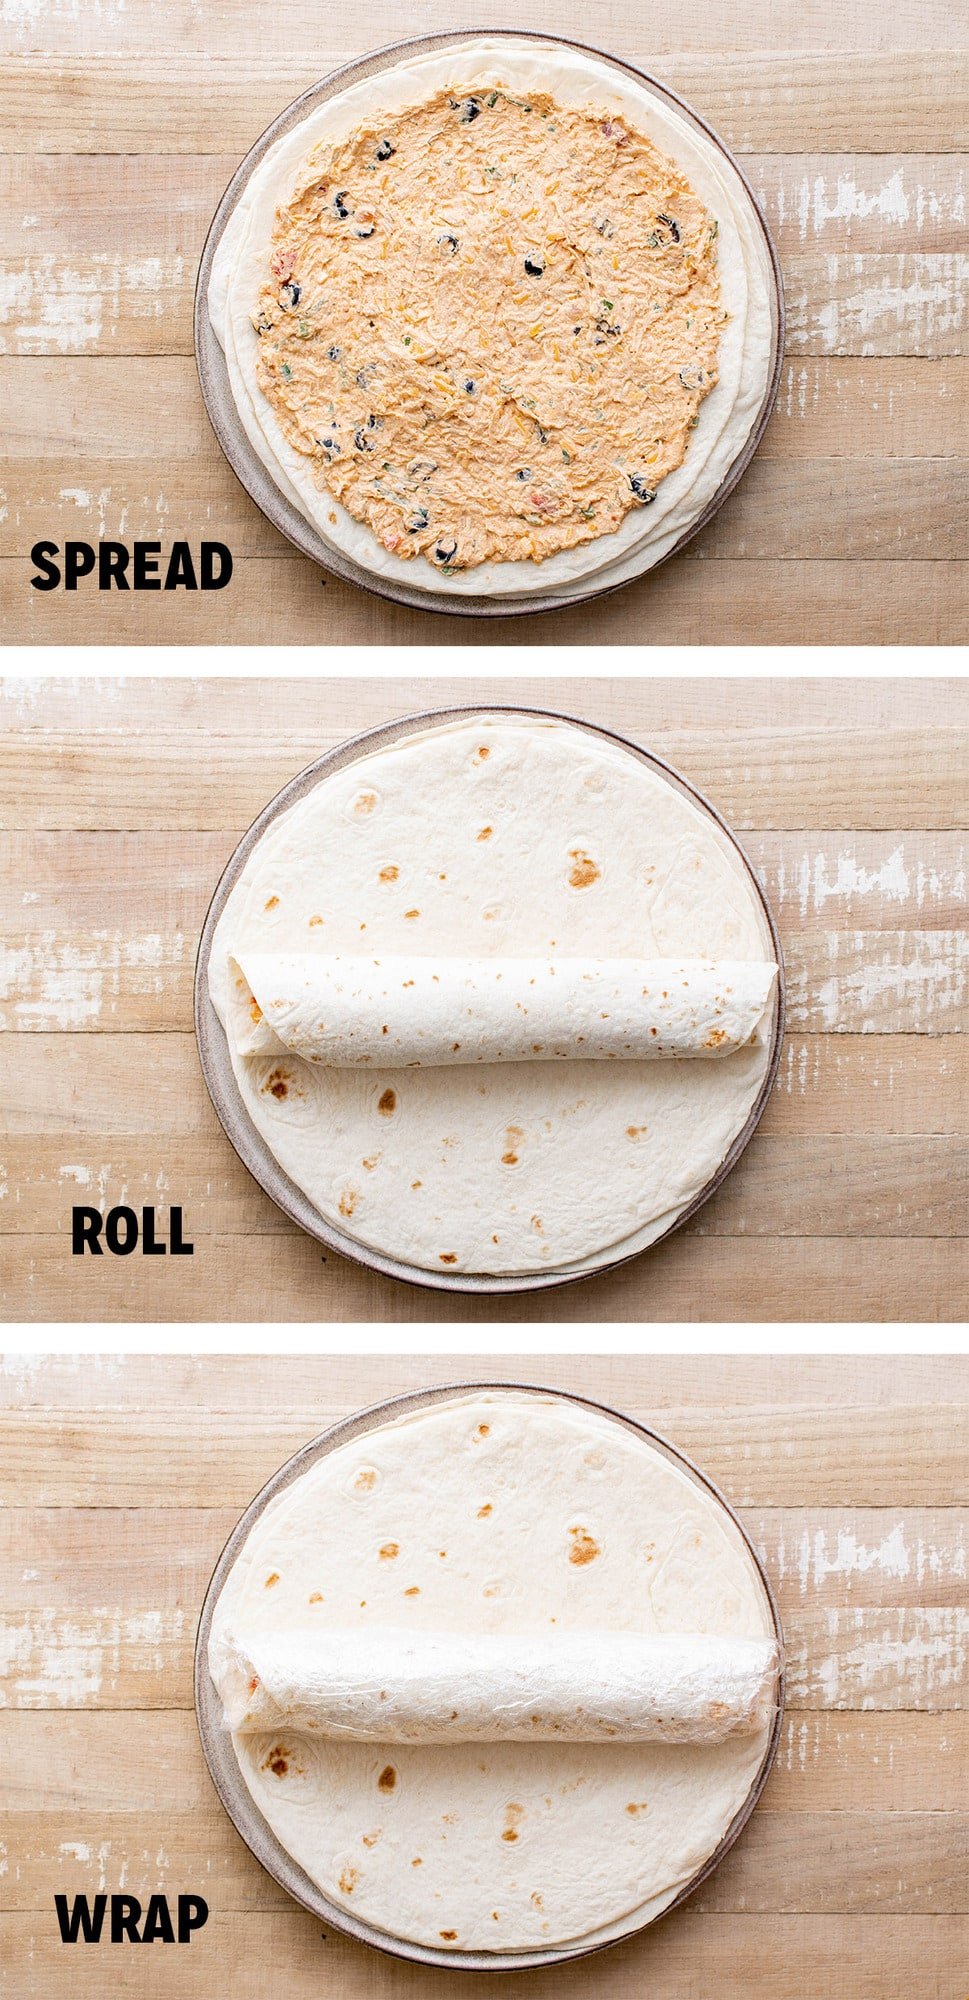 chicken and cheese mixture spead on a flour tortilla, images showing how to roll up tortilla pinwheels